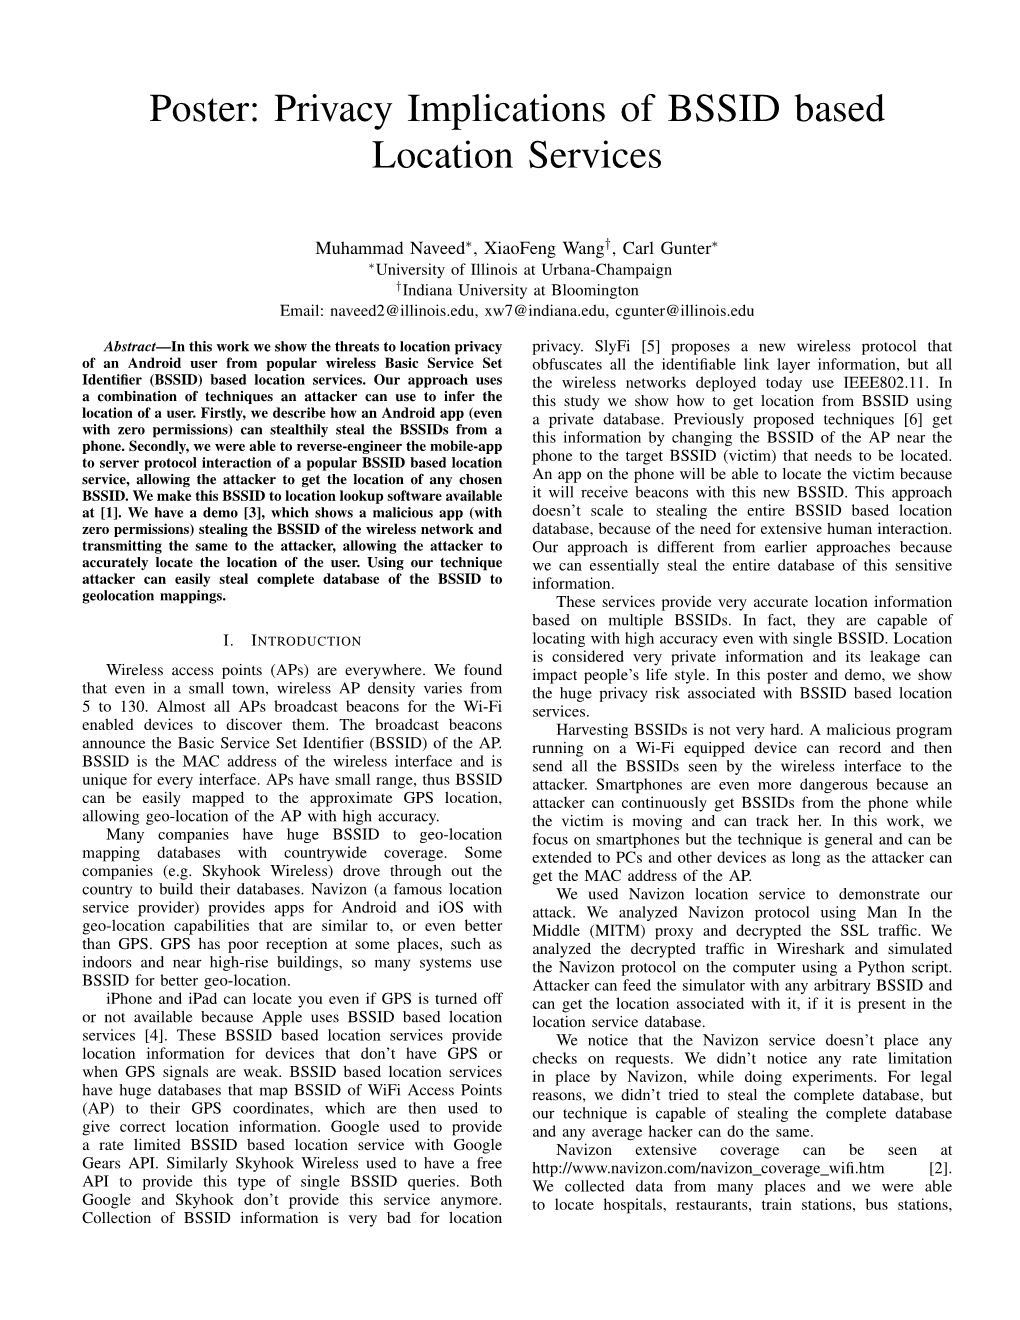 Privacy Implications of BSSID Based Location Services